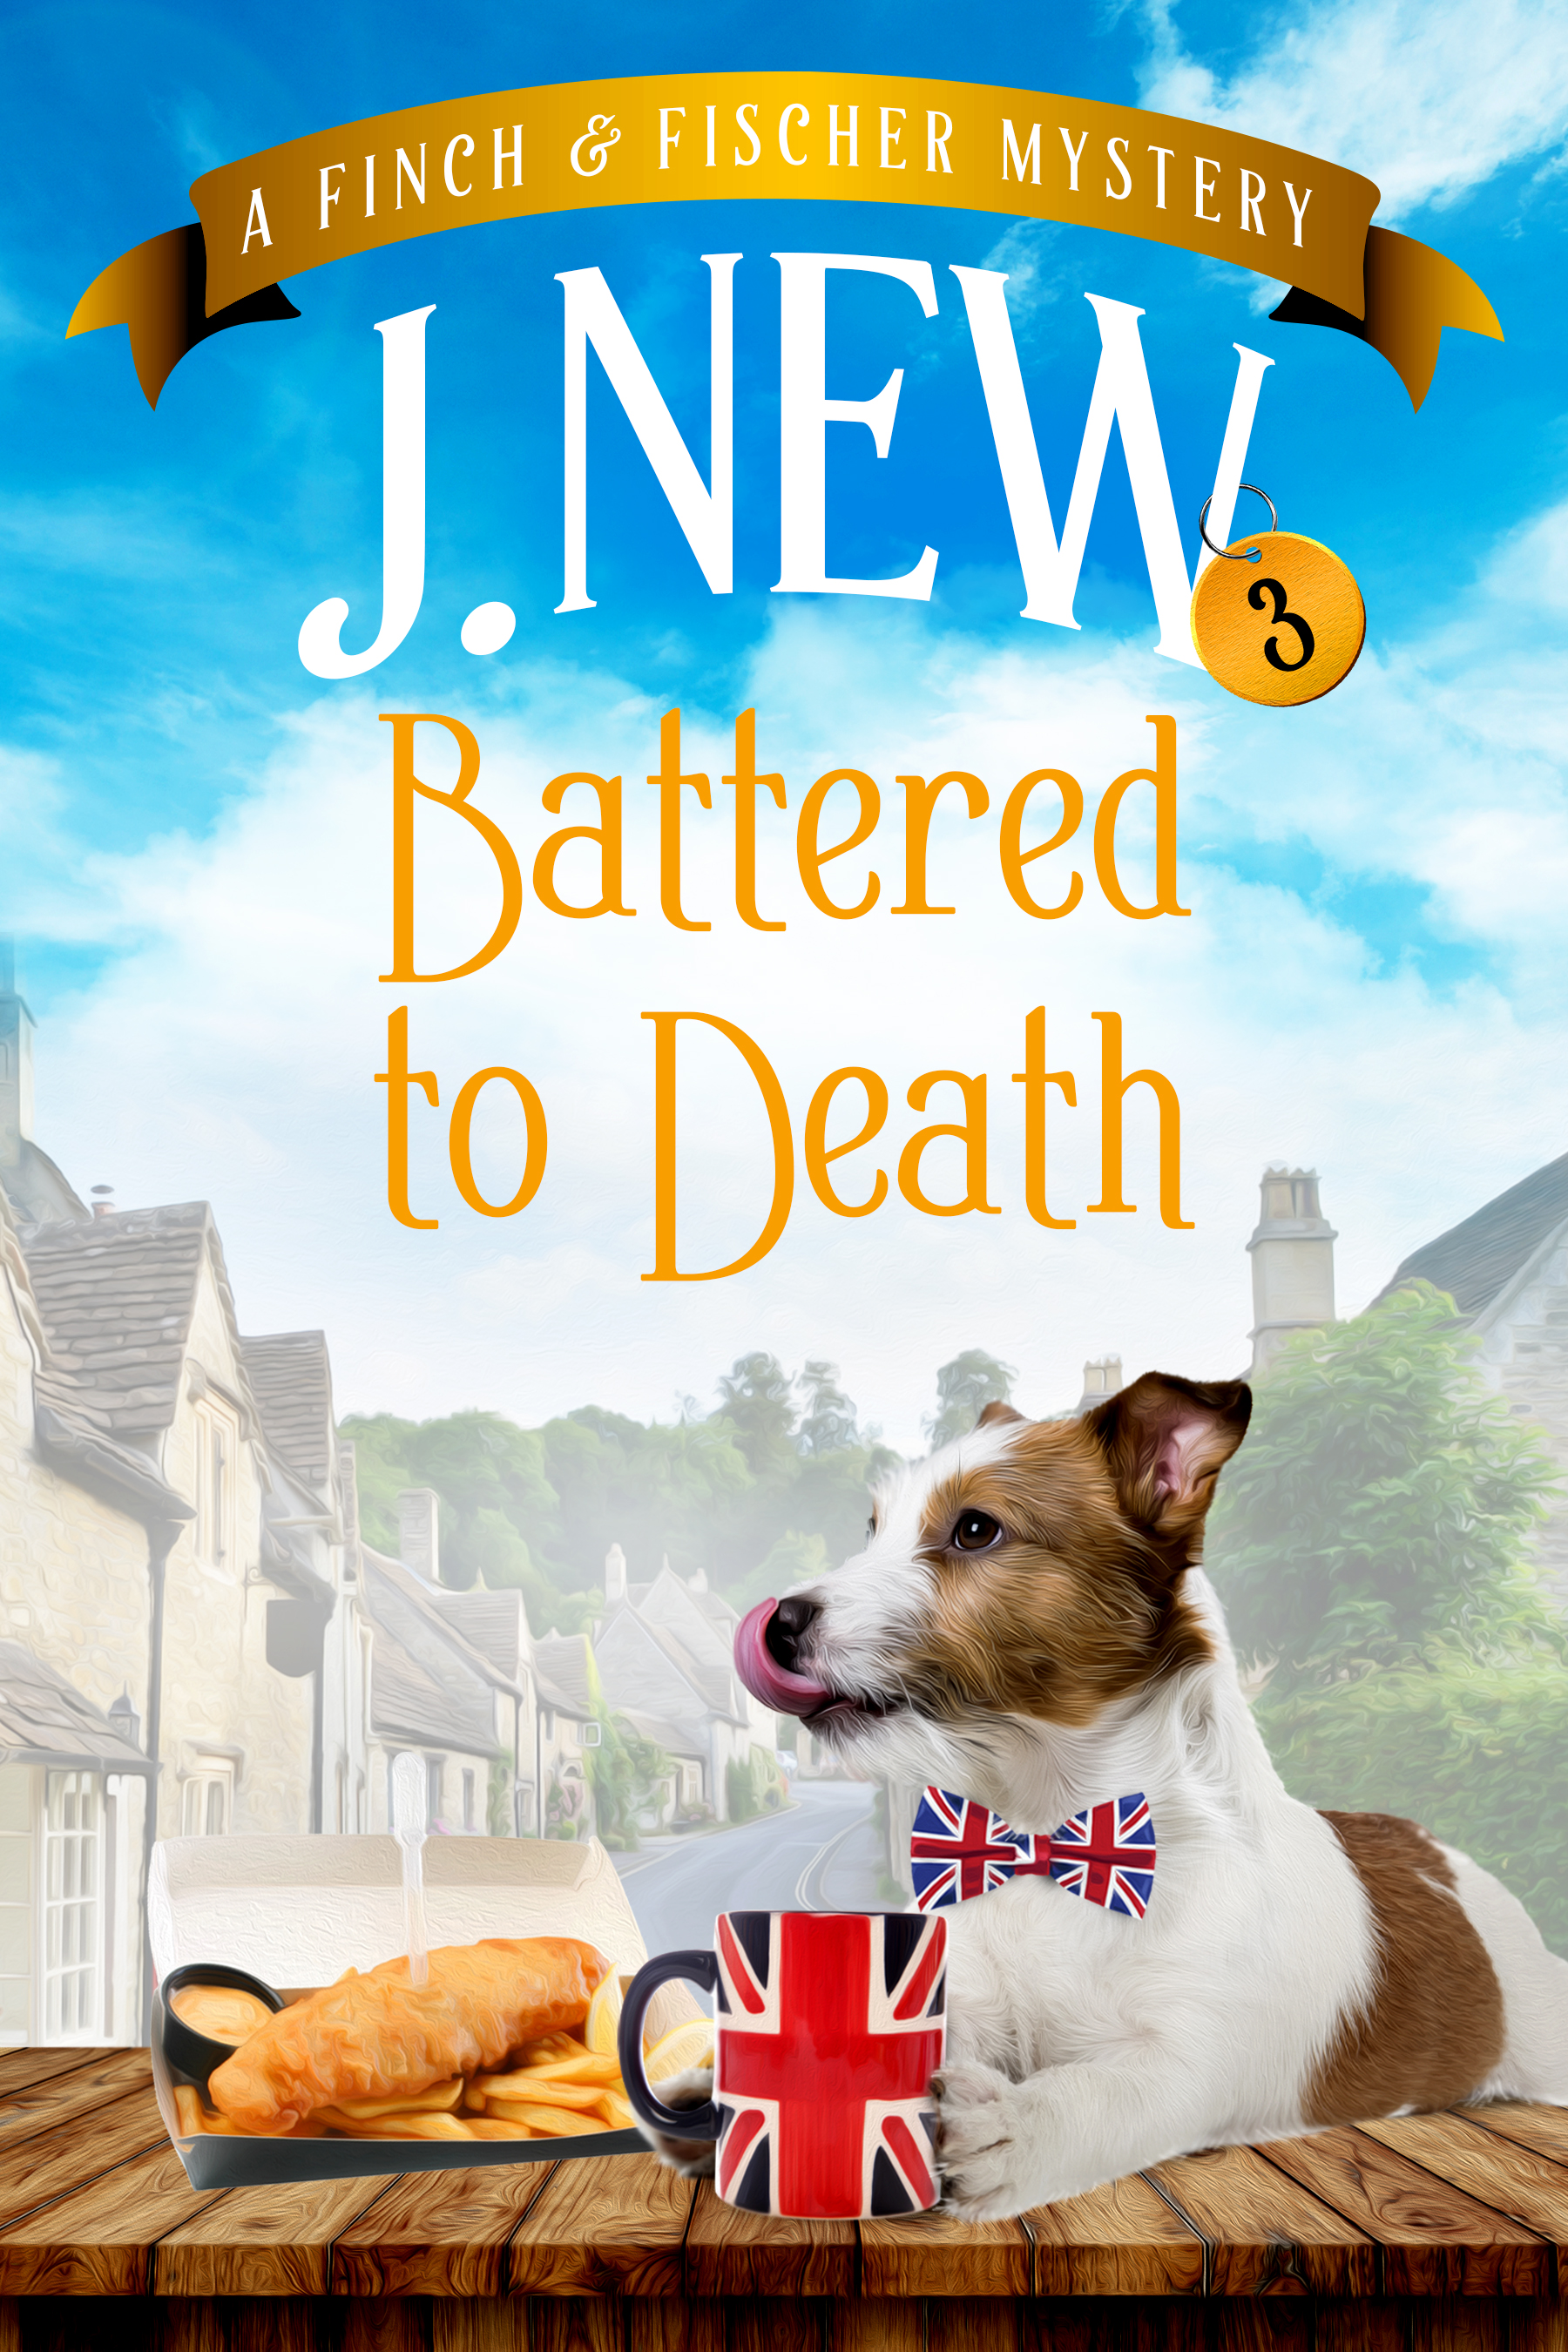 Battered to Death the third book in the hugely popular Finch and Fischer British cozy mystery series by author J. New